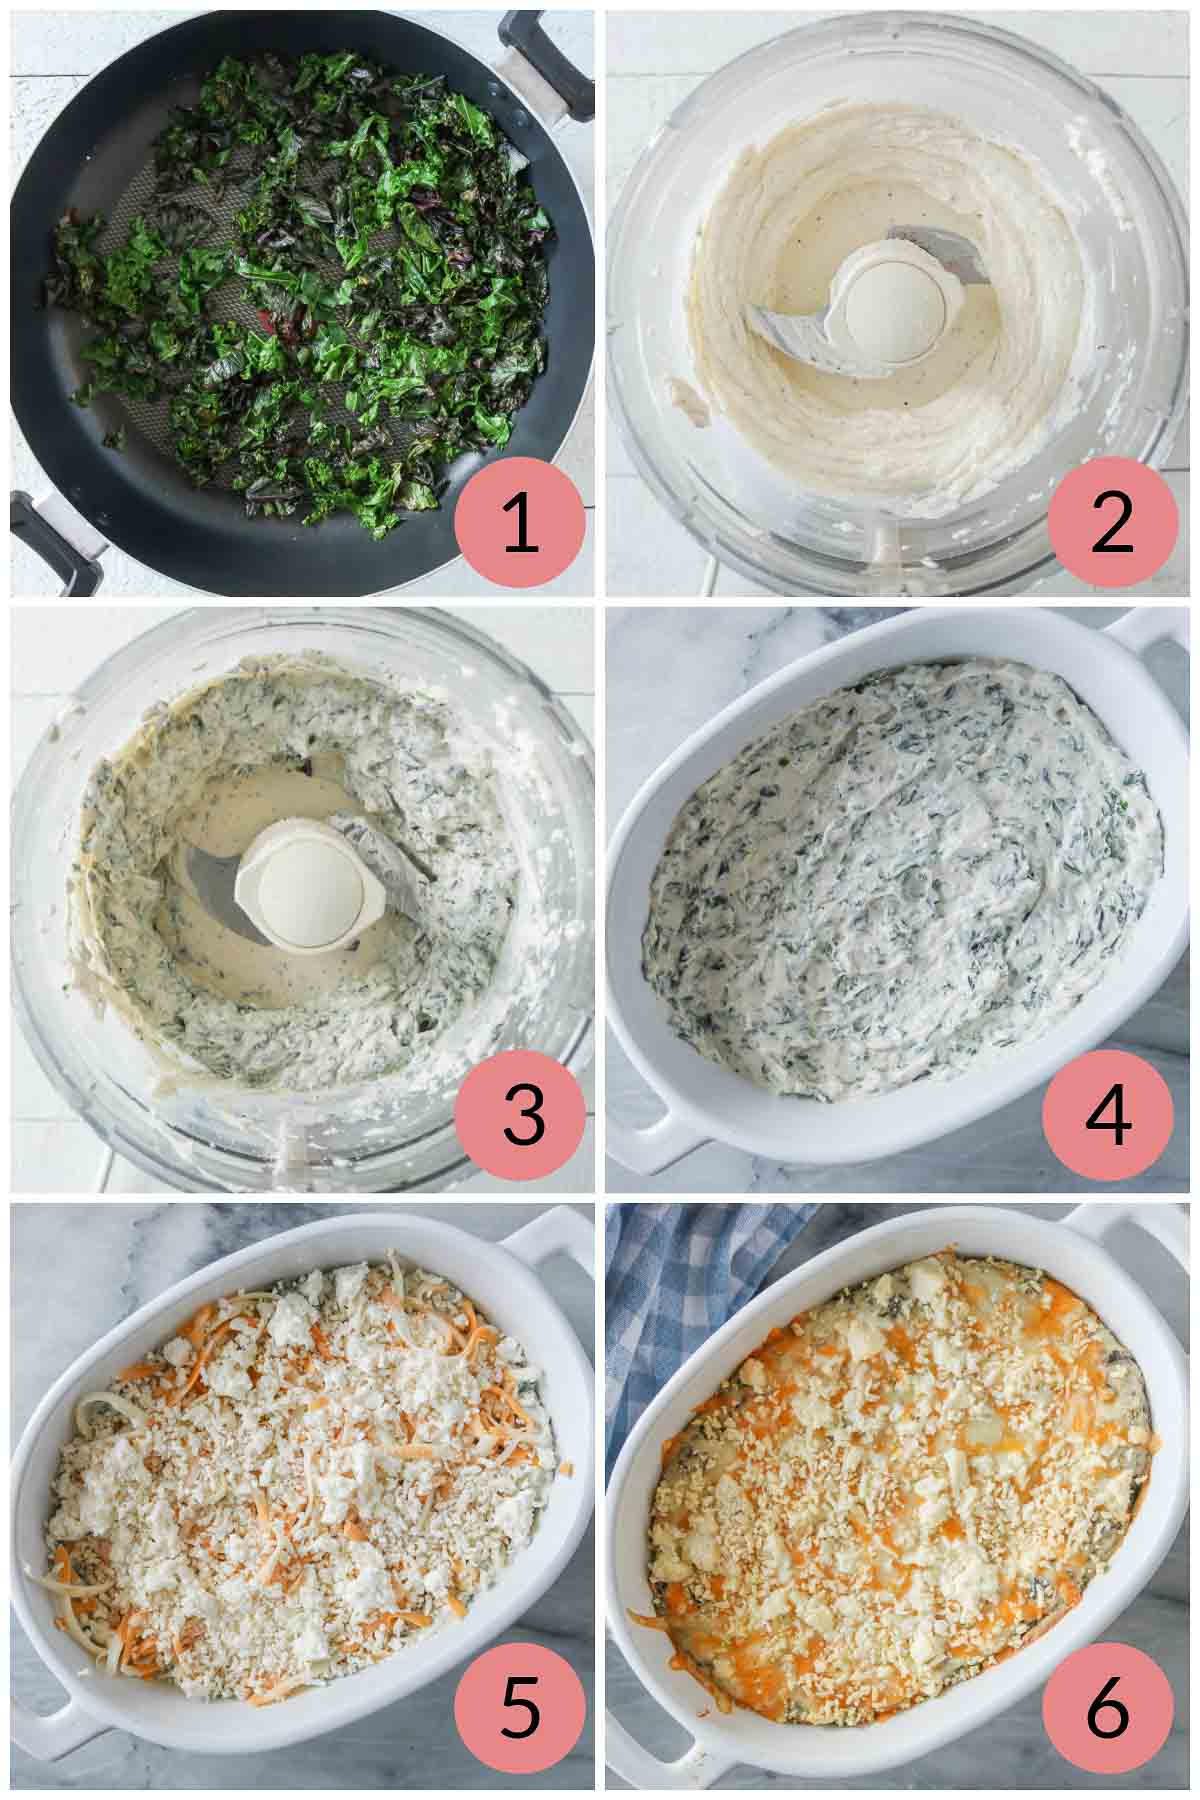 Collage of steps to make a baked kale dip recipe.